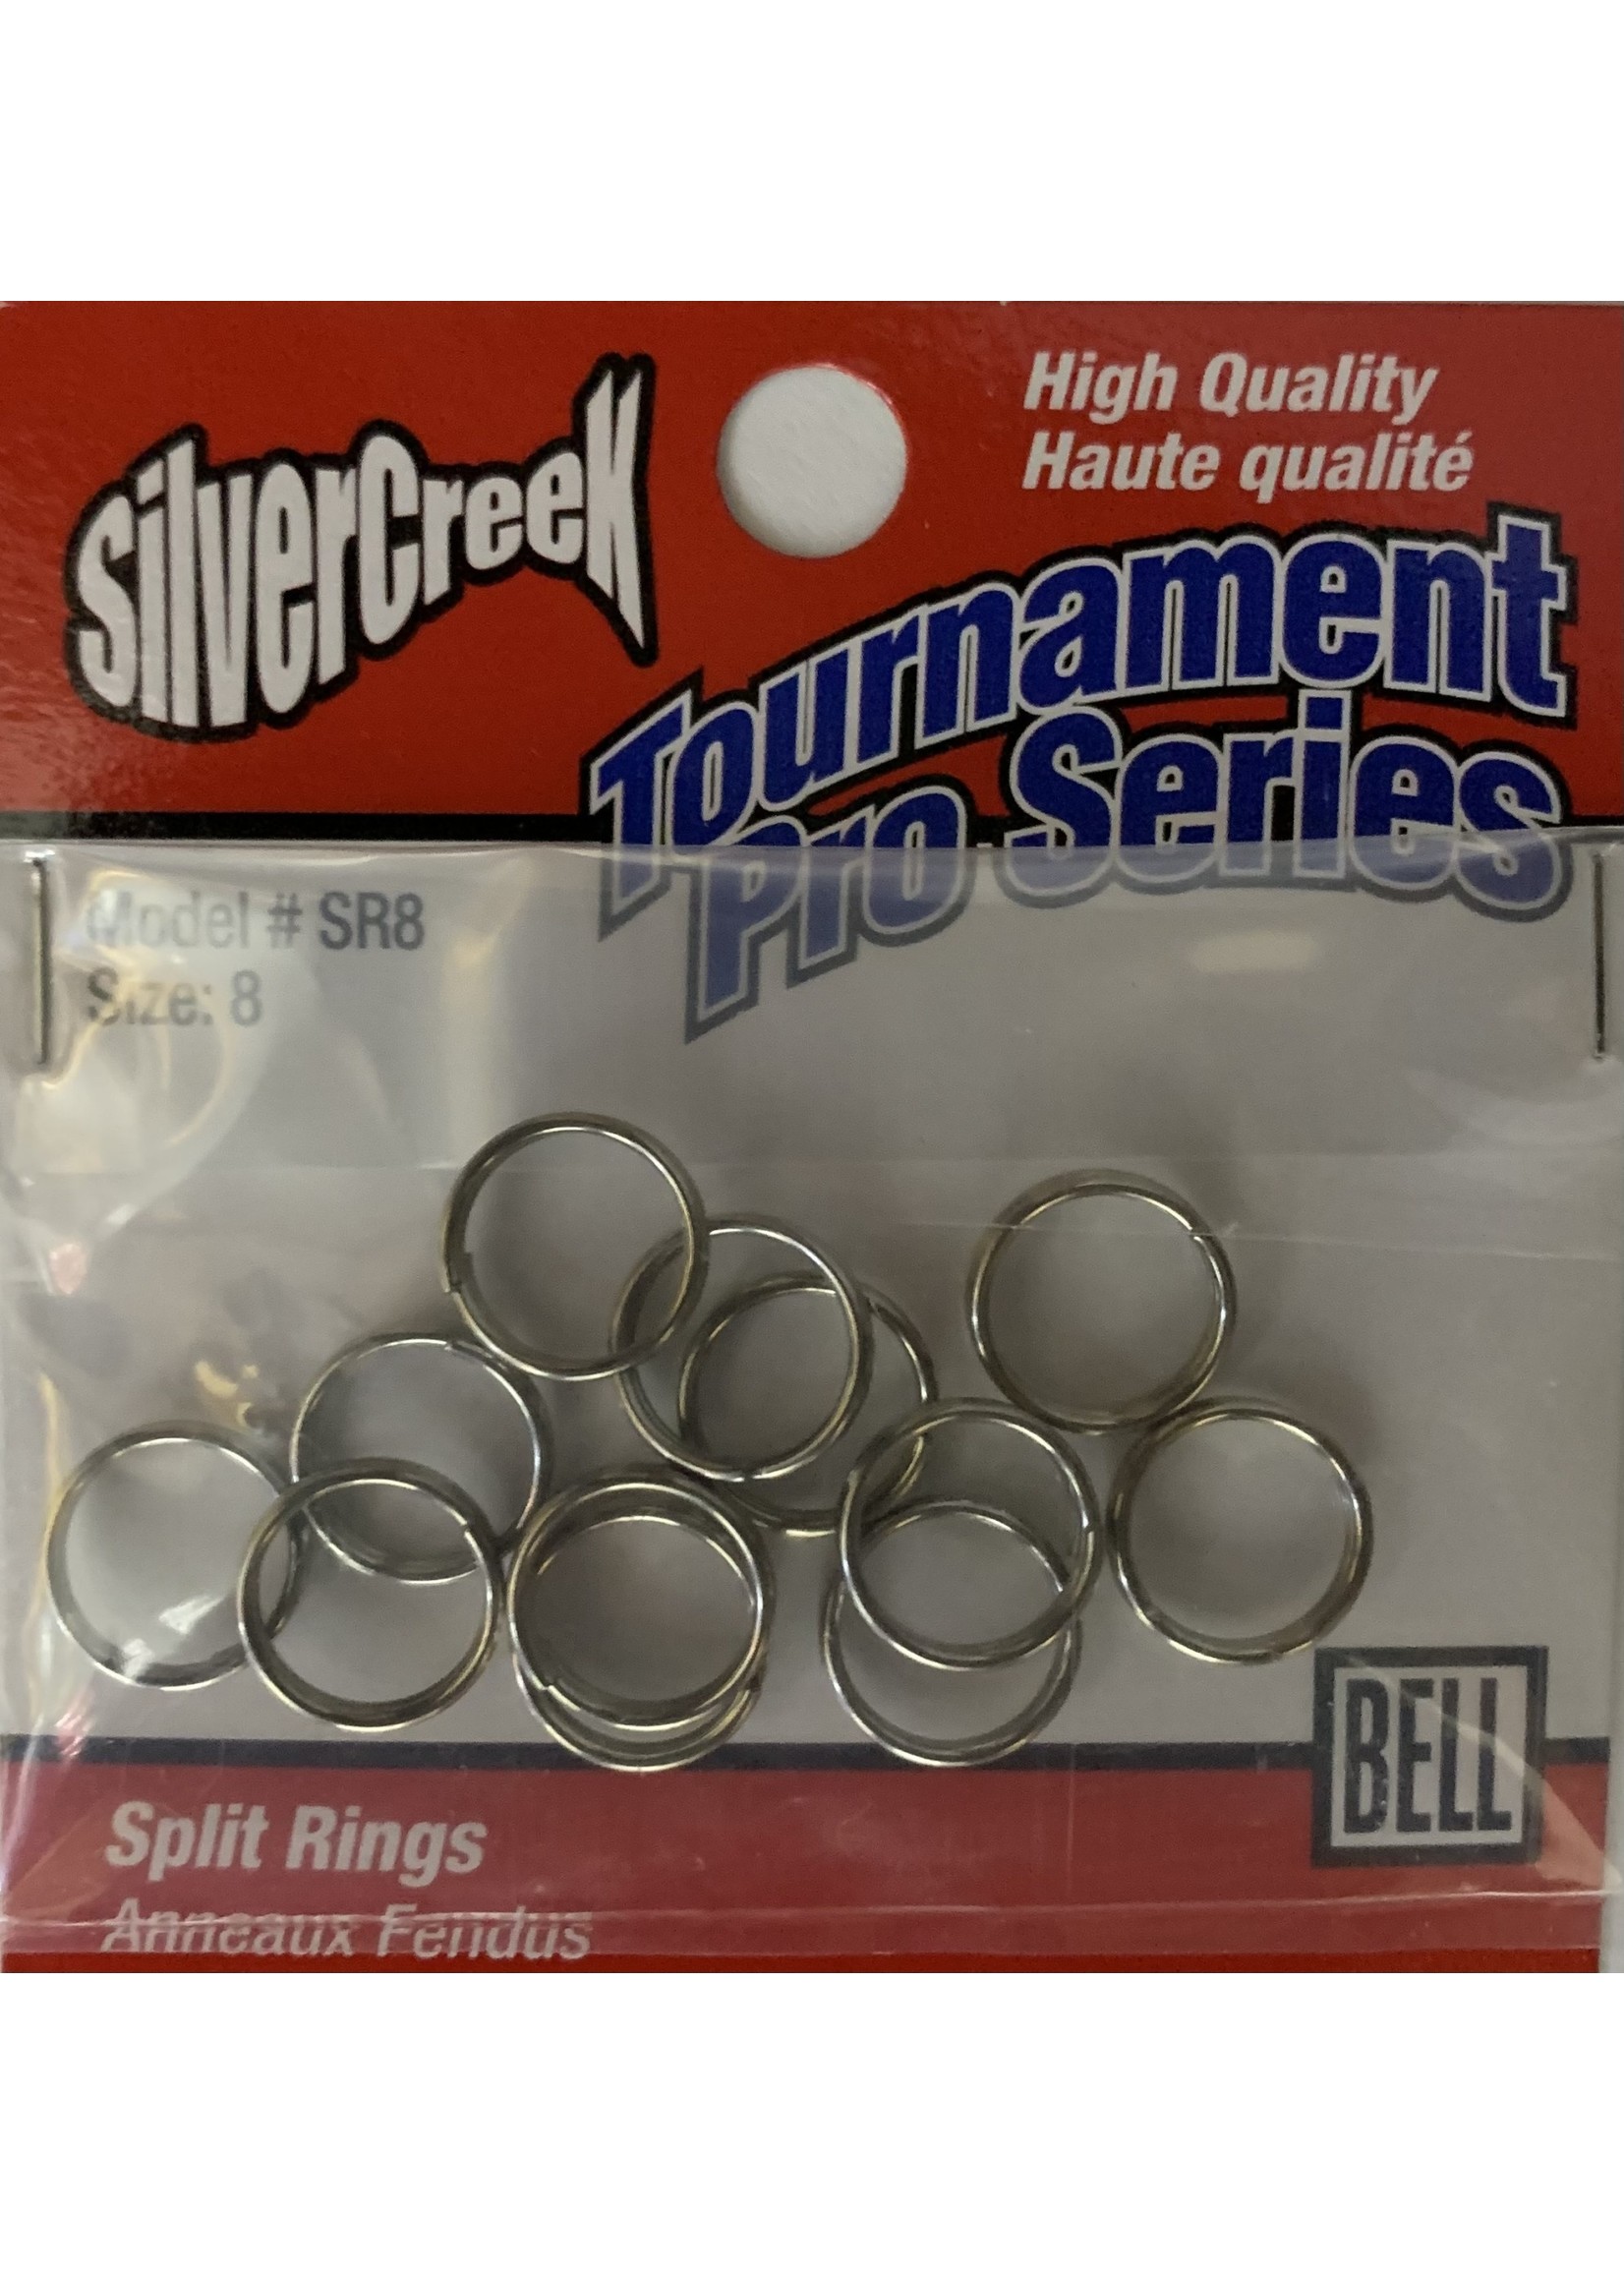 BELL OUTDOOR PRODUCTS SILVER CREEK SPLIT RINGS 12PER PK